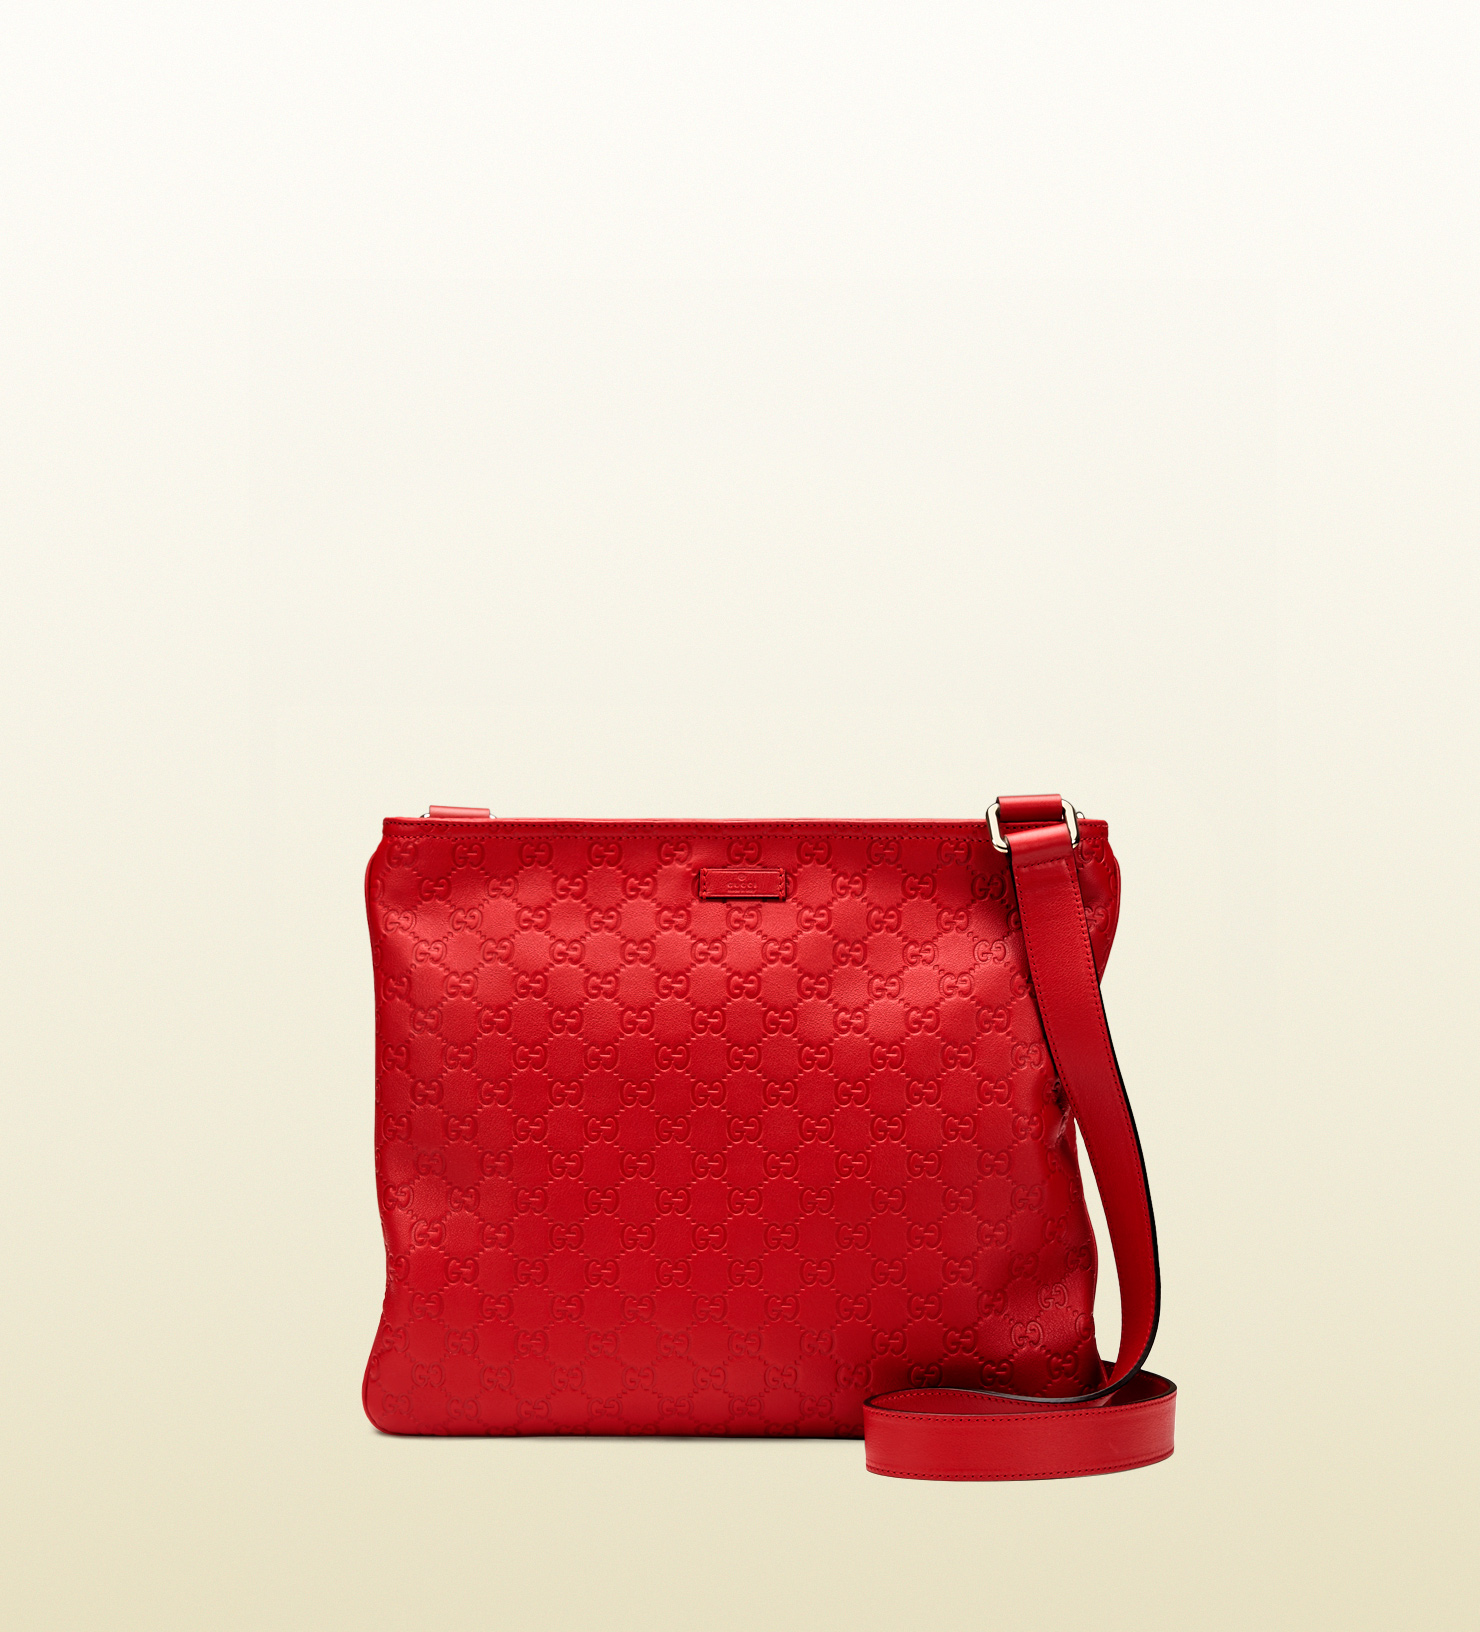 Lyst - Gucci Red Ssima Leather Messenger Bag in Red for Men